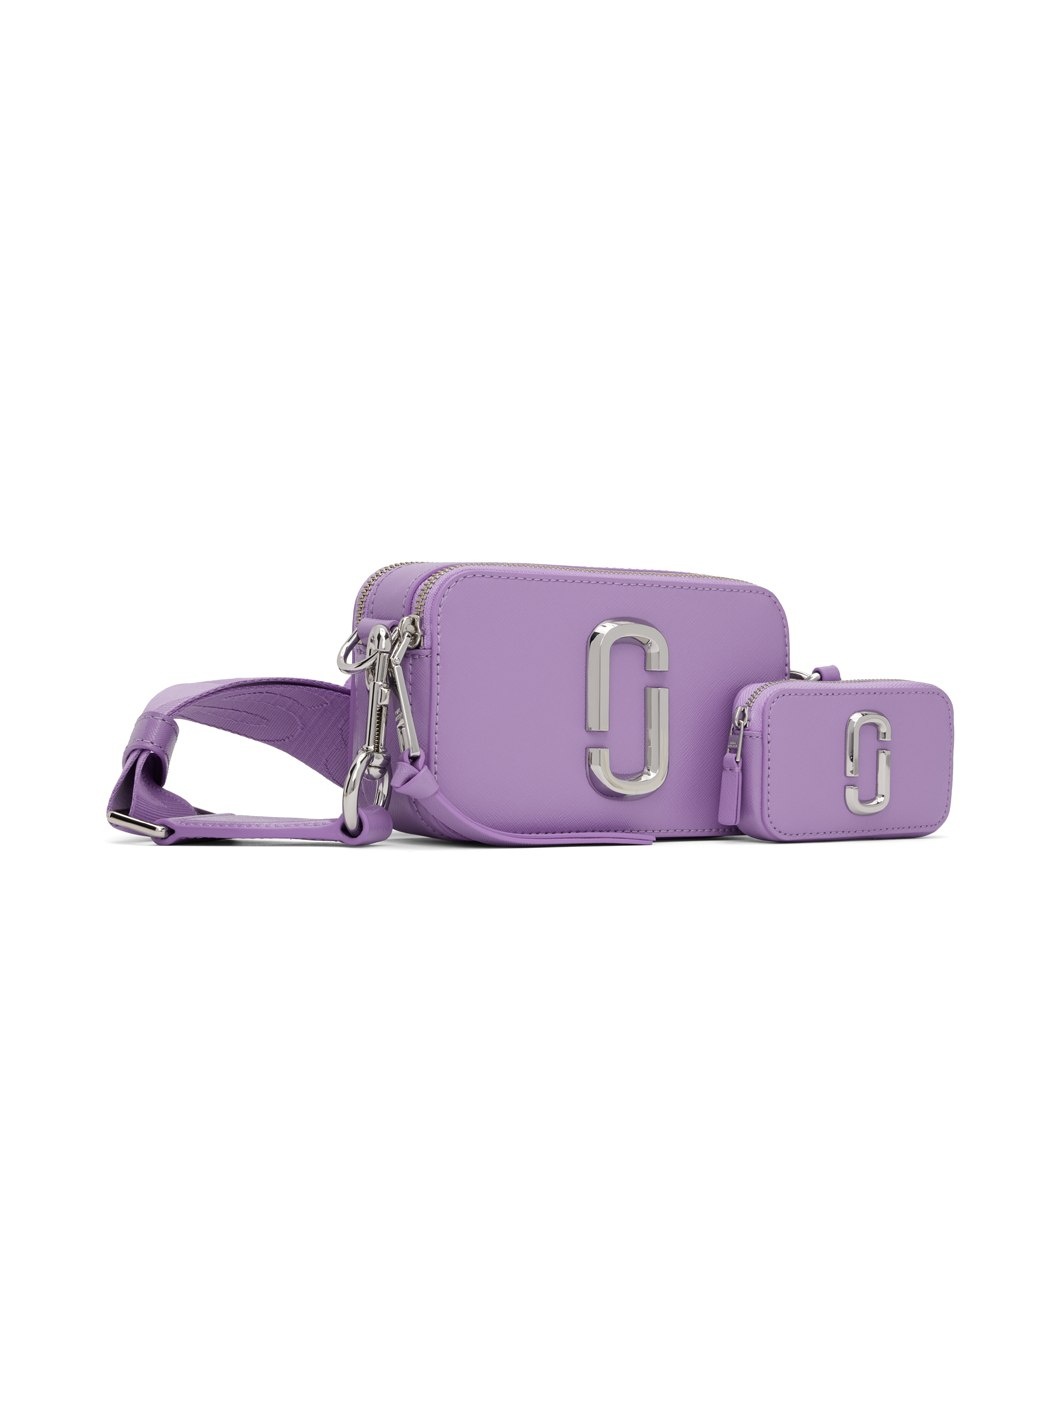 MARC JACOBS: The Snapshot Saffiano leather bag - Lilac